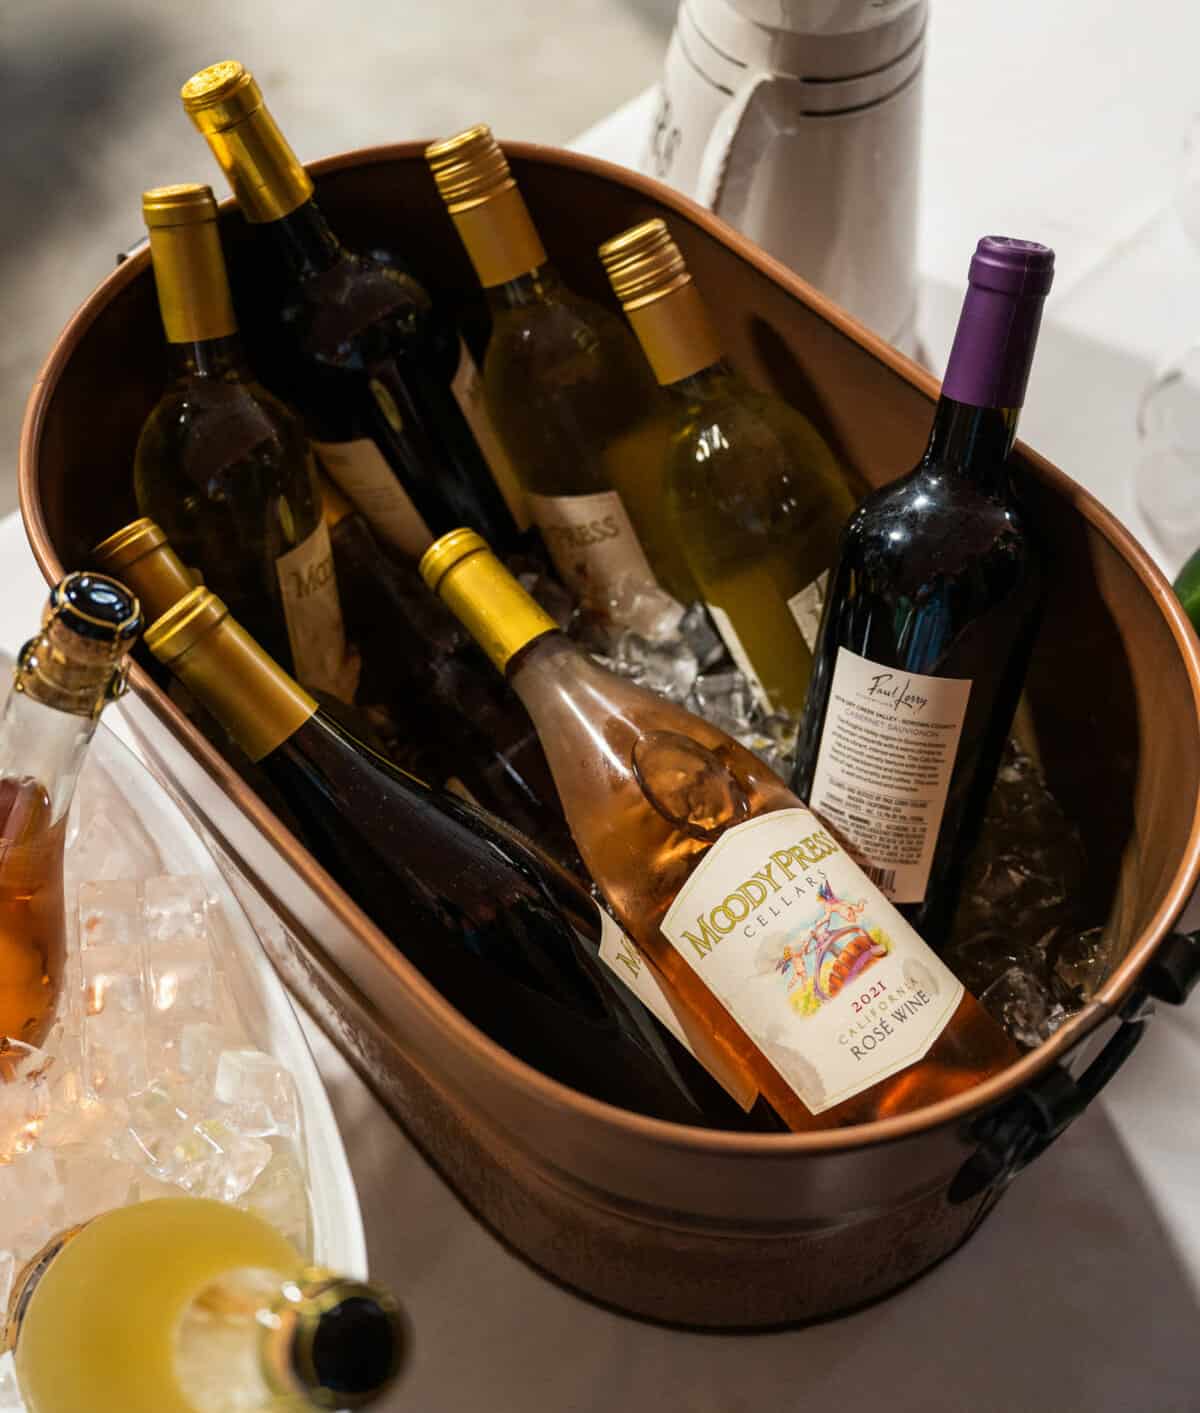 Wine bucket with Moody Press rosé. Moody Press was the first label released by San Joaquin Winery